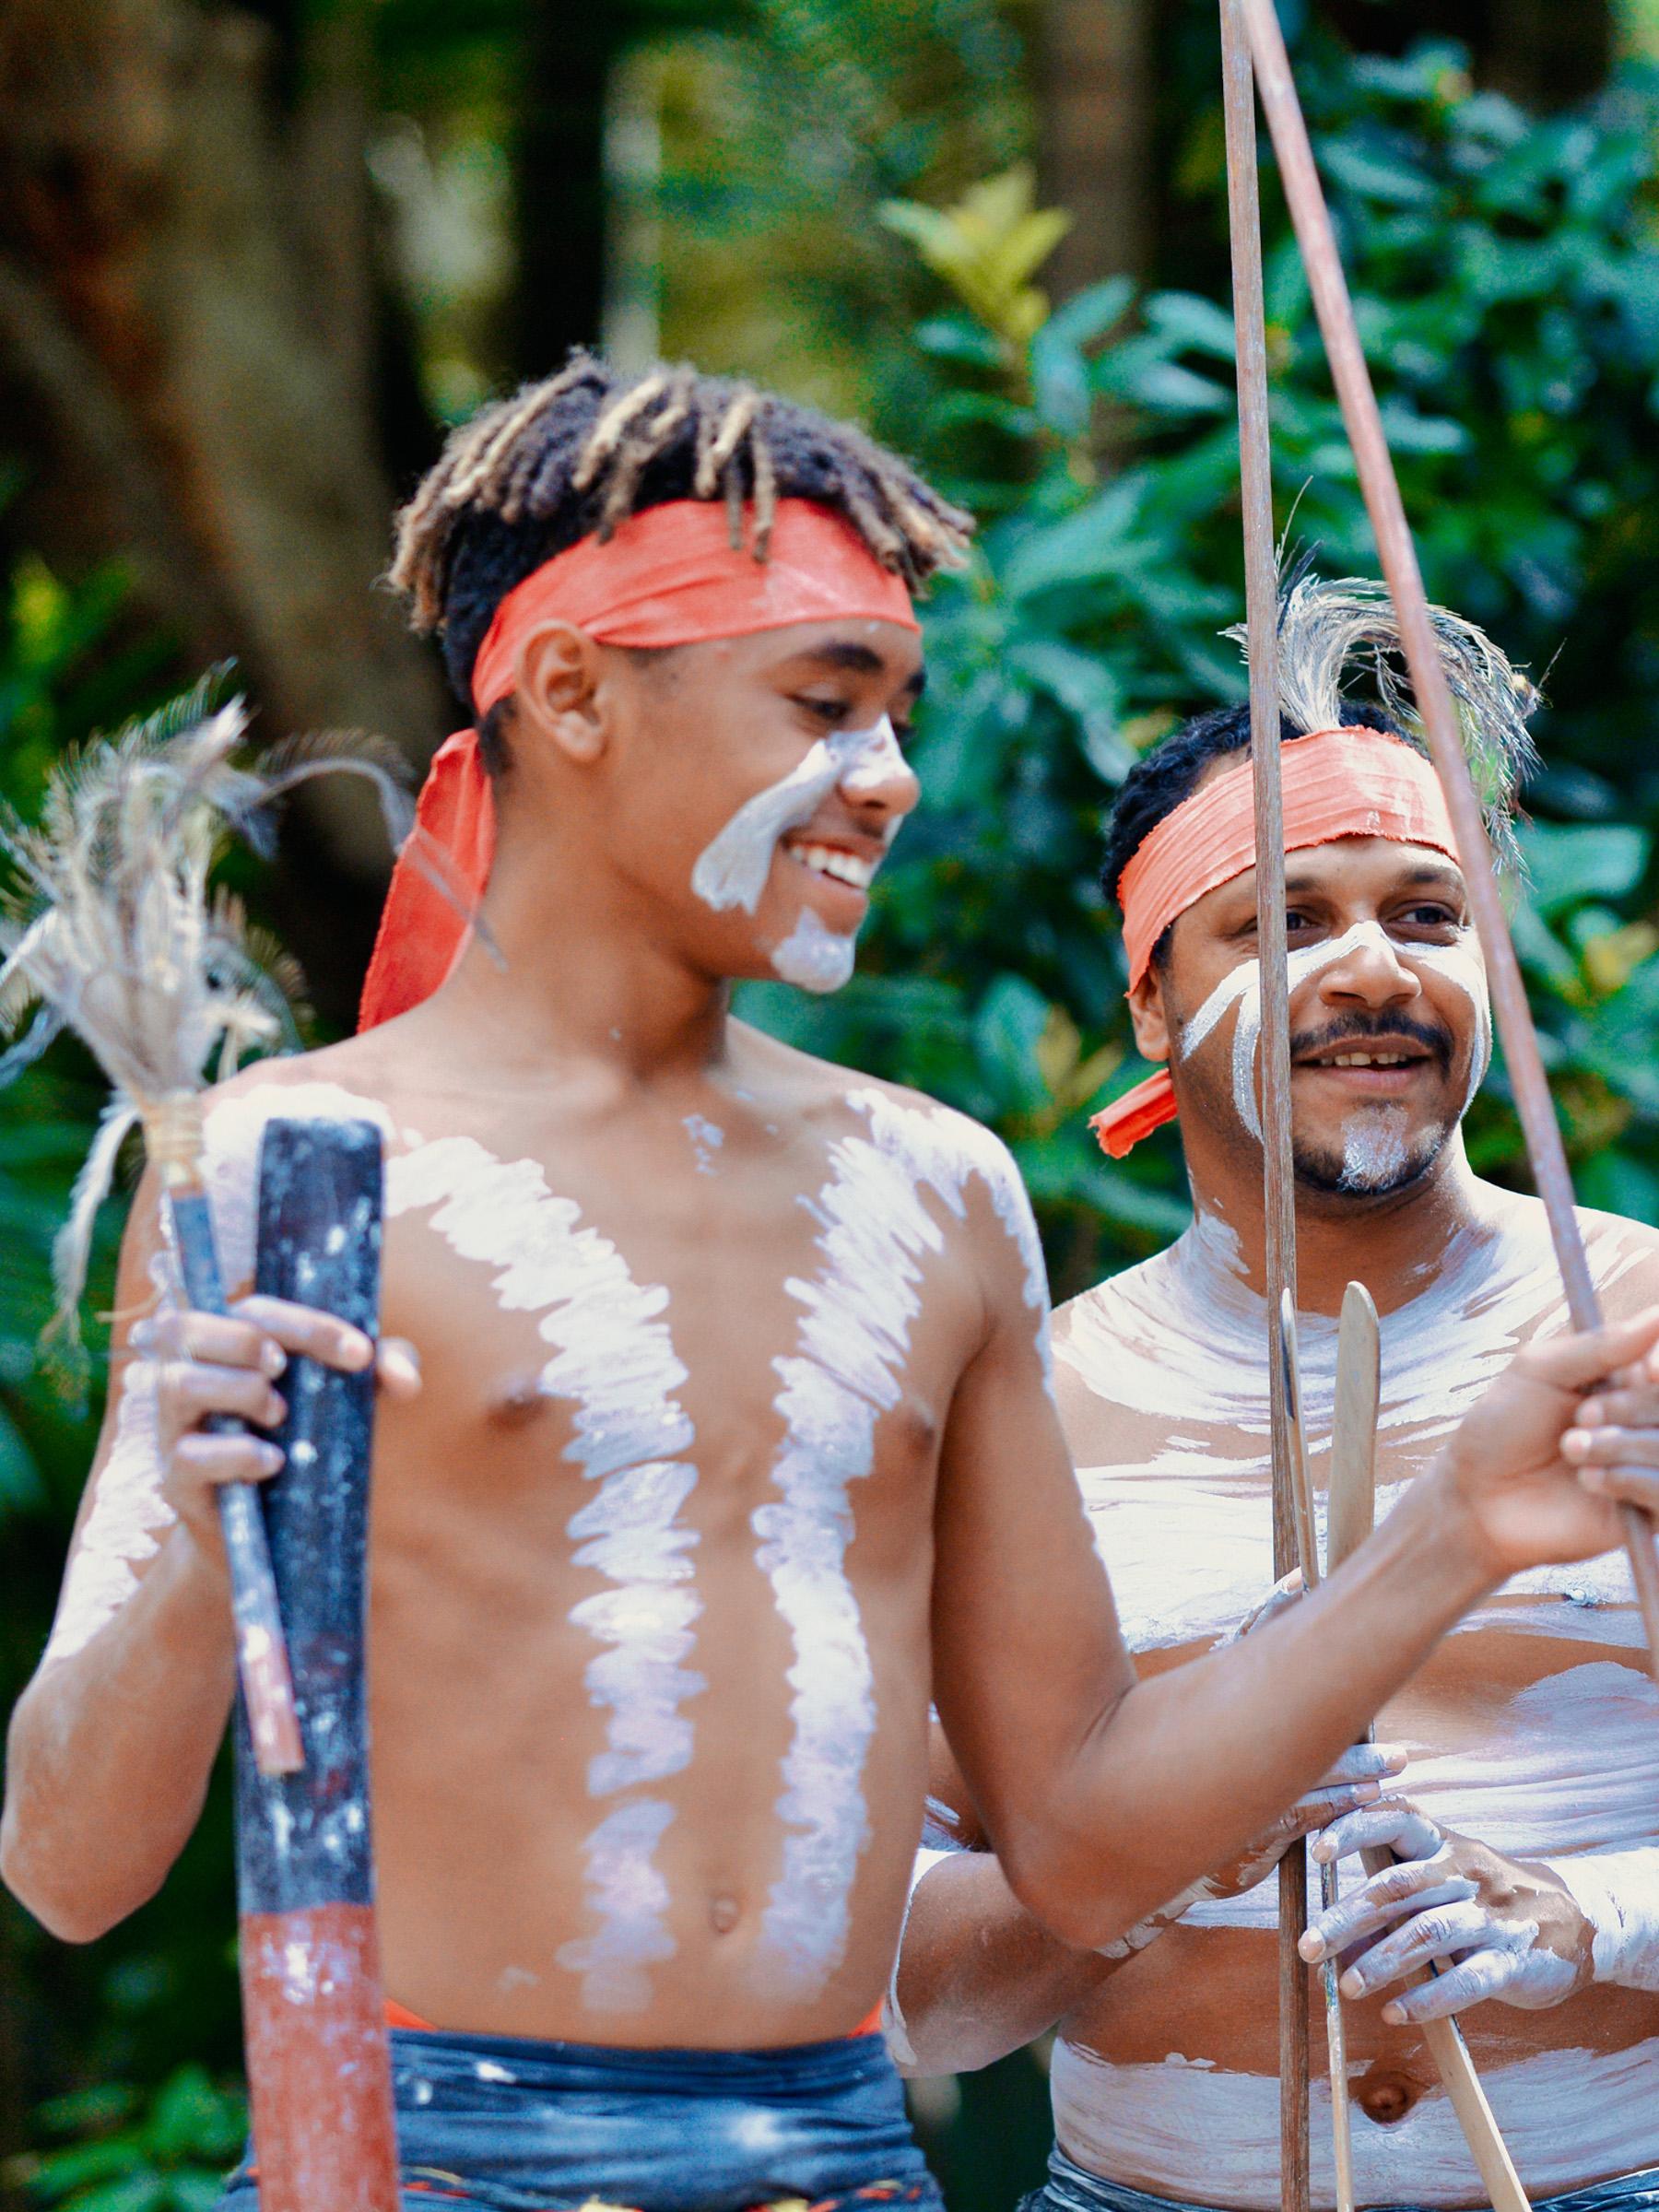 Two young First Nations men with traditional face and body paint, smiling during a performance